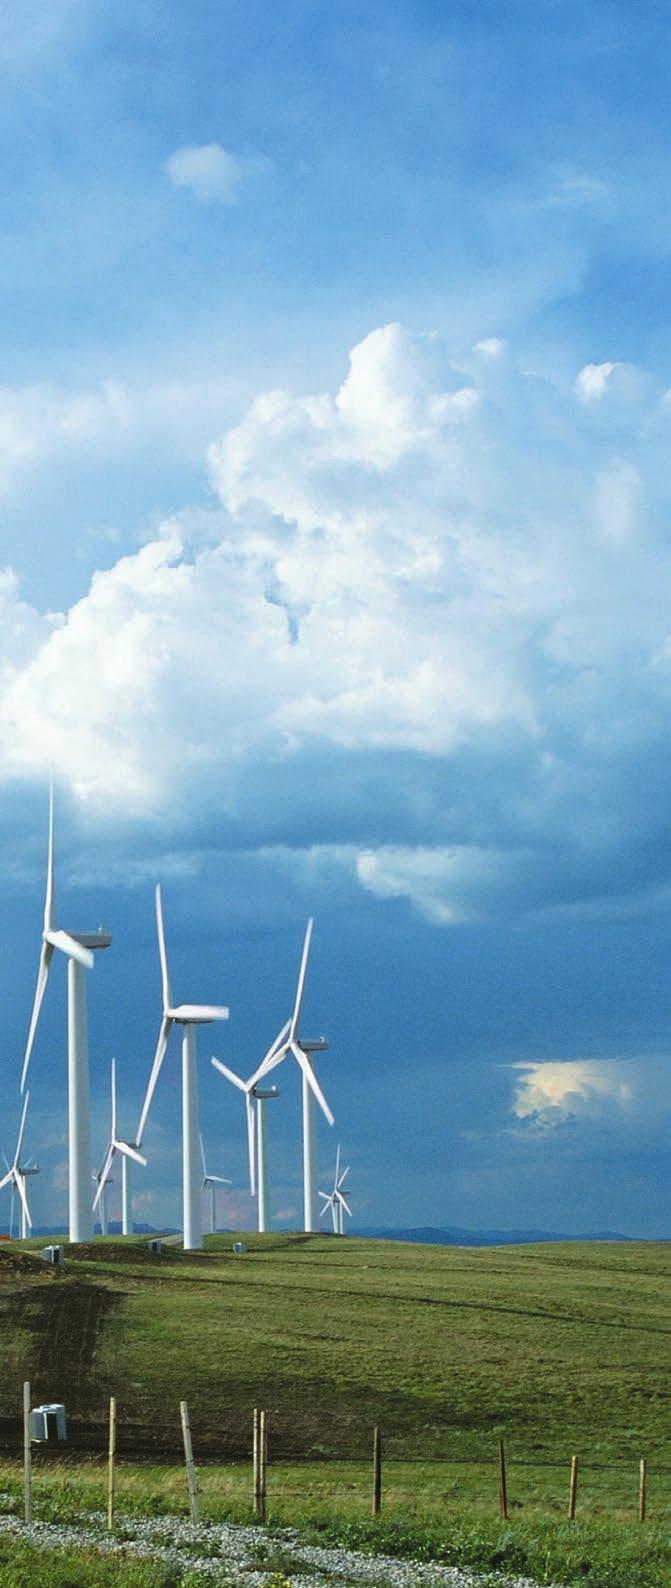 Our wind power industry experts are as deeply rooted in their profession as you are.